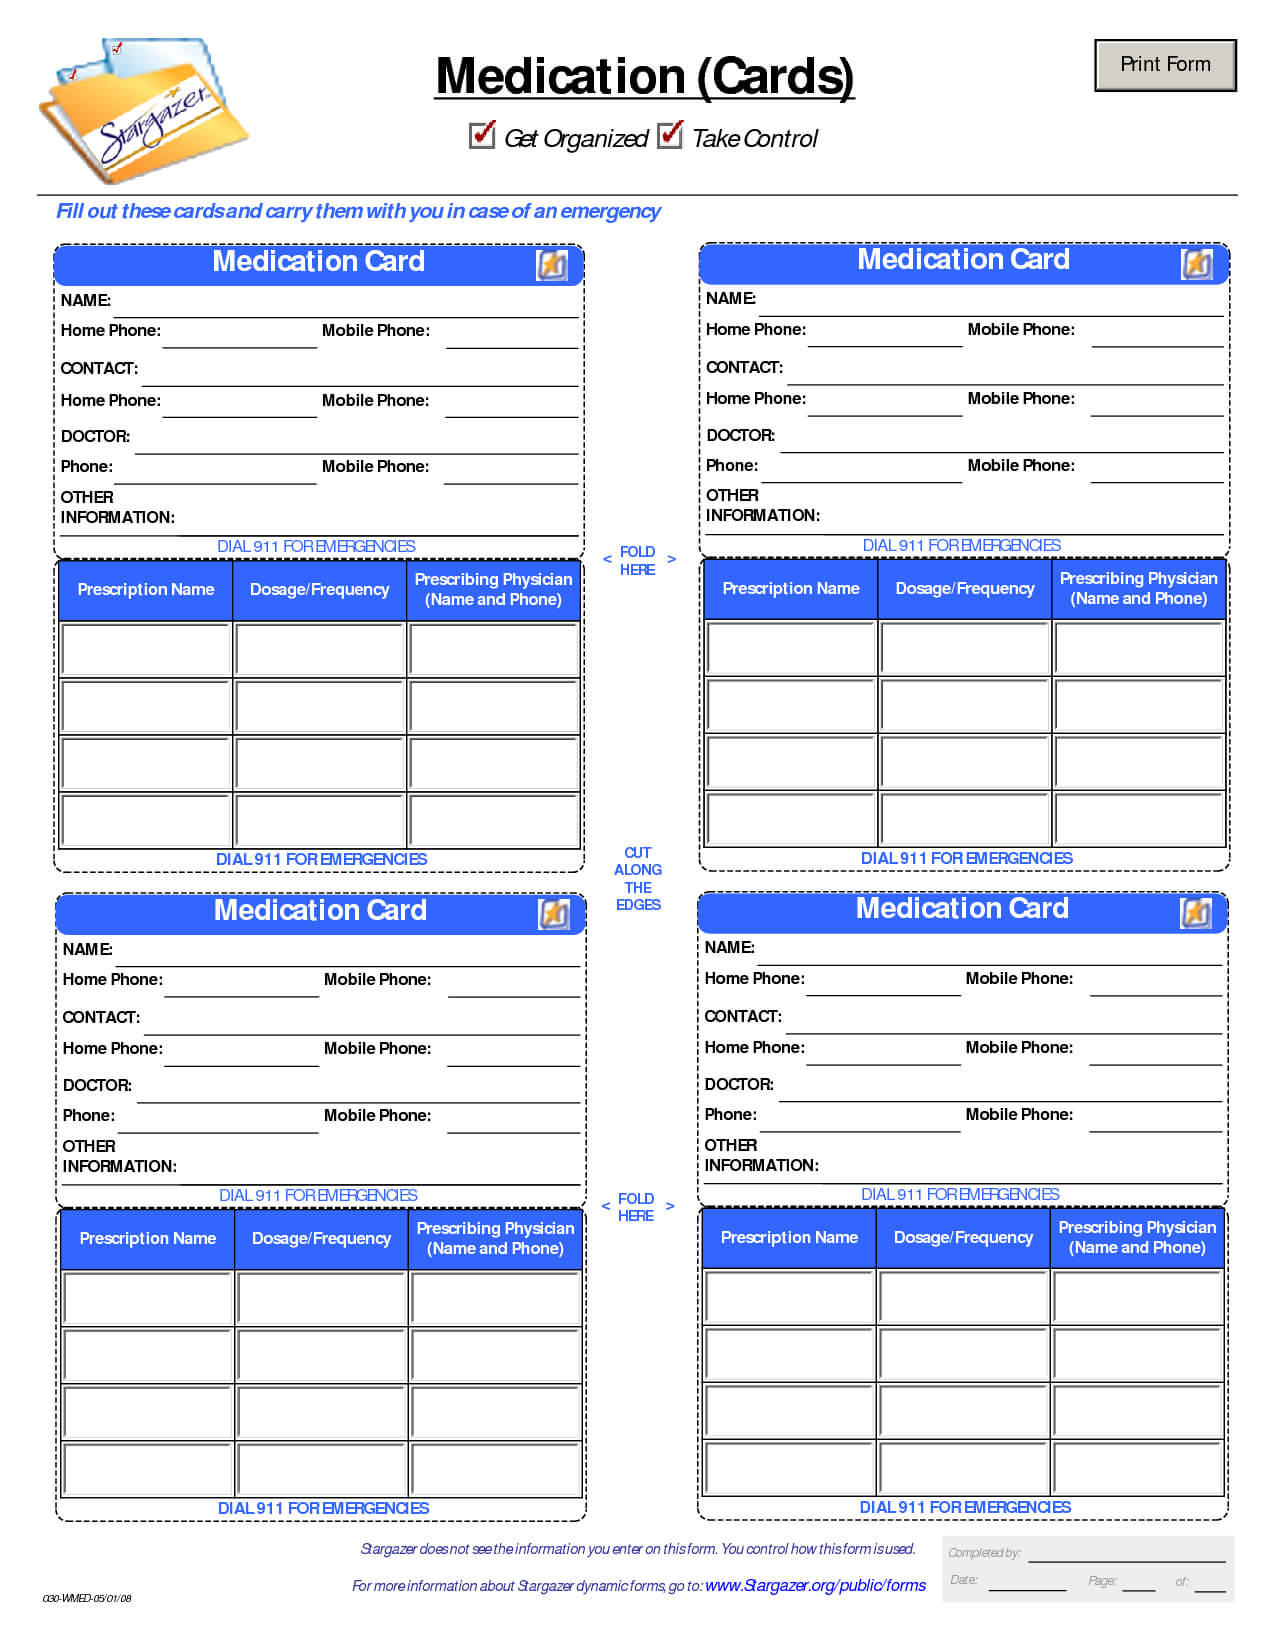 Patient Medication Card Template | Medication List, Medical In Med Cards Template